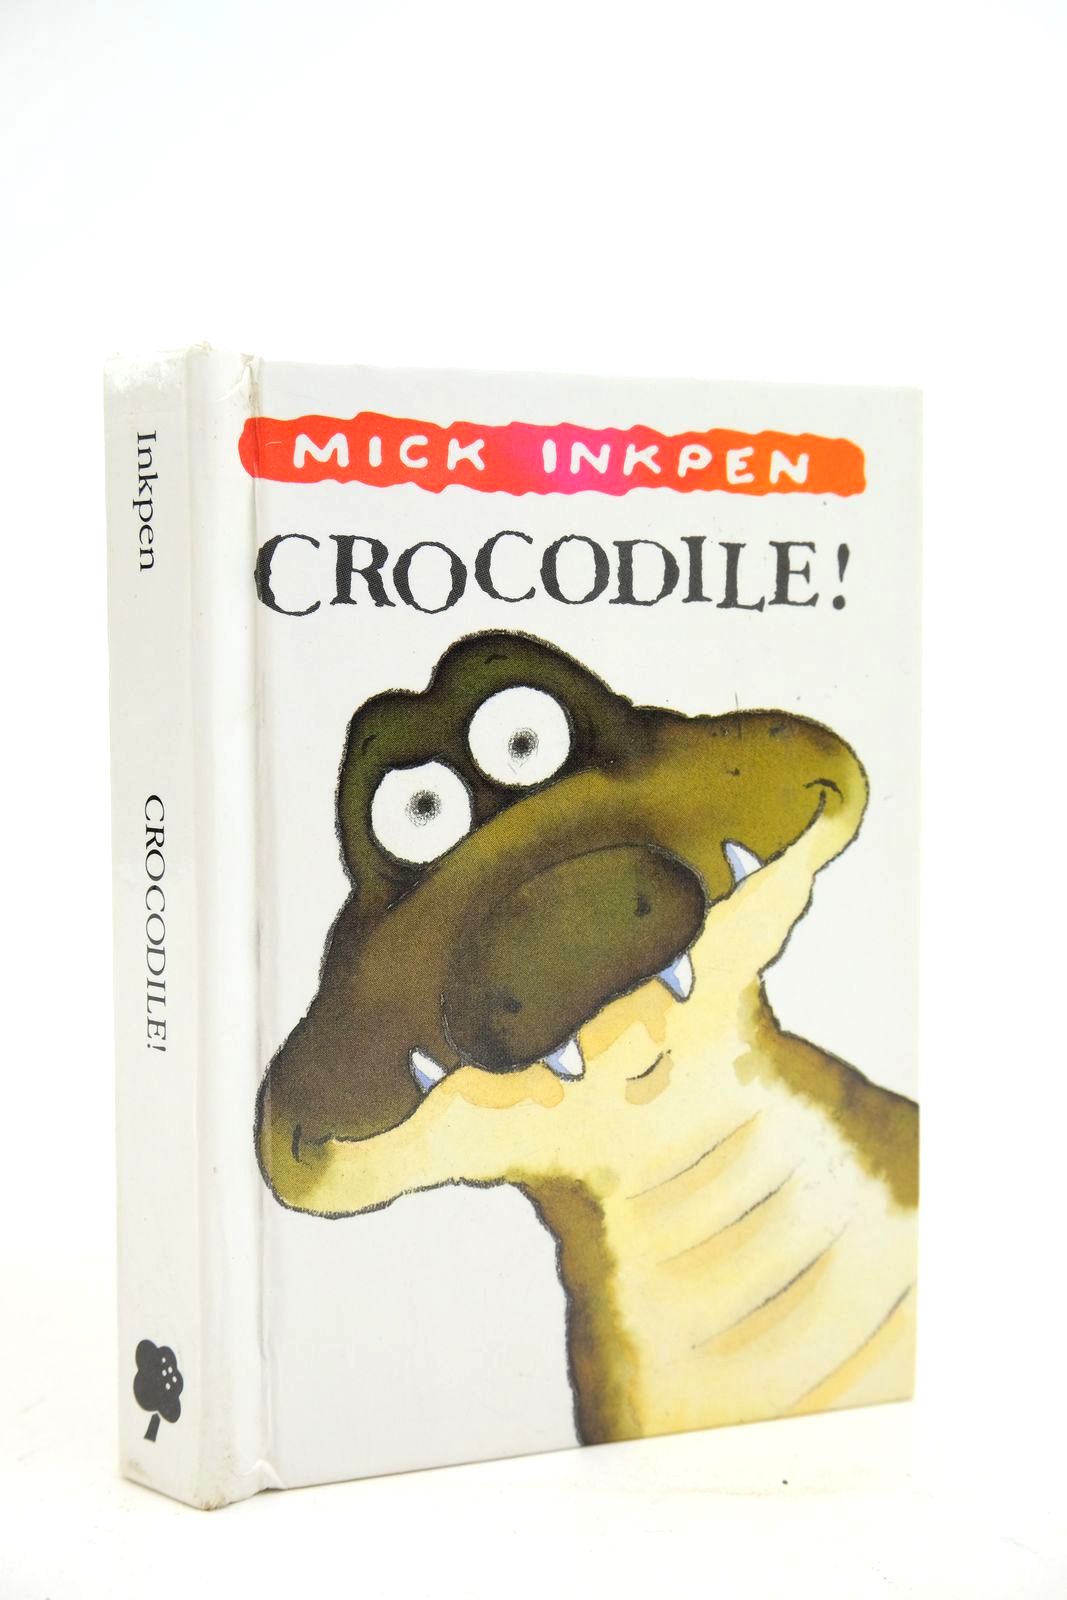 Photo of CROCODILE written by Inkpen, Mick illustrated by Inkpen, Mick published by Orchard Books (STOCK CODE: 2140906)  for sale by Stella & Rose's Books